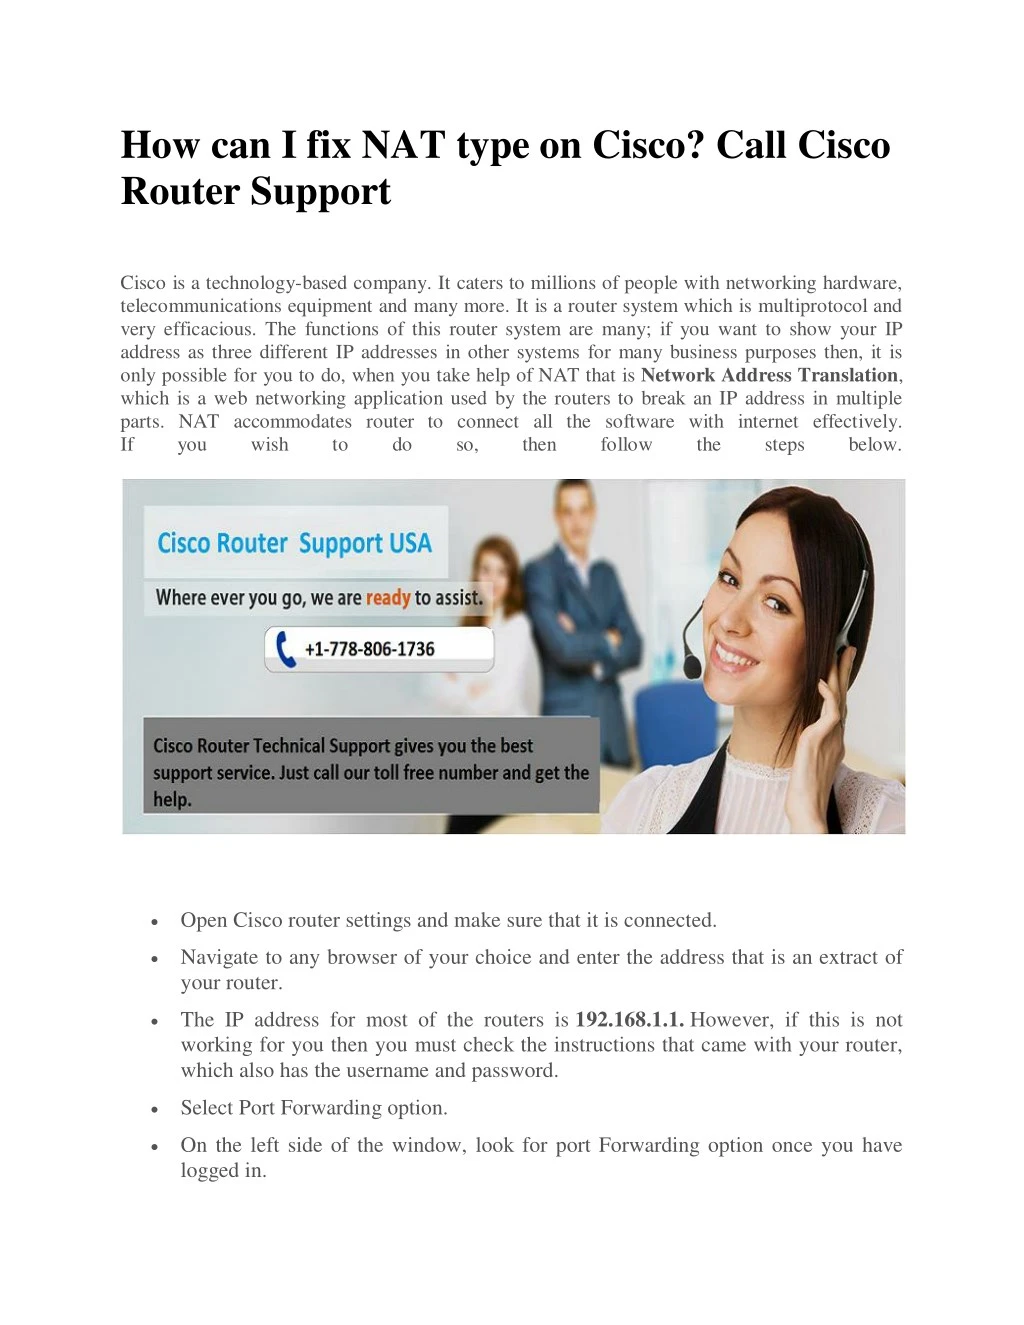 how can i fix nat type on cisco call cisco router